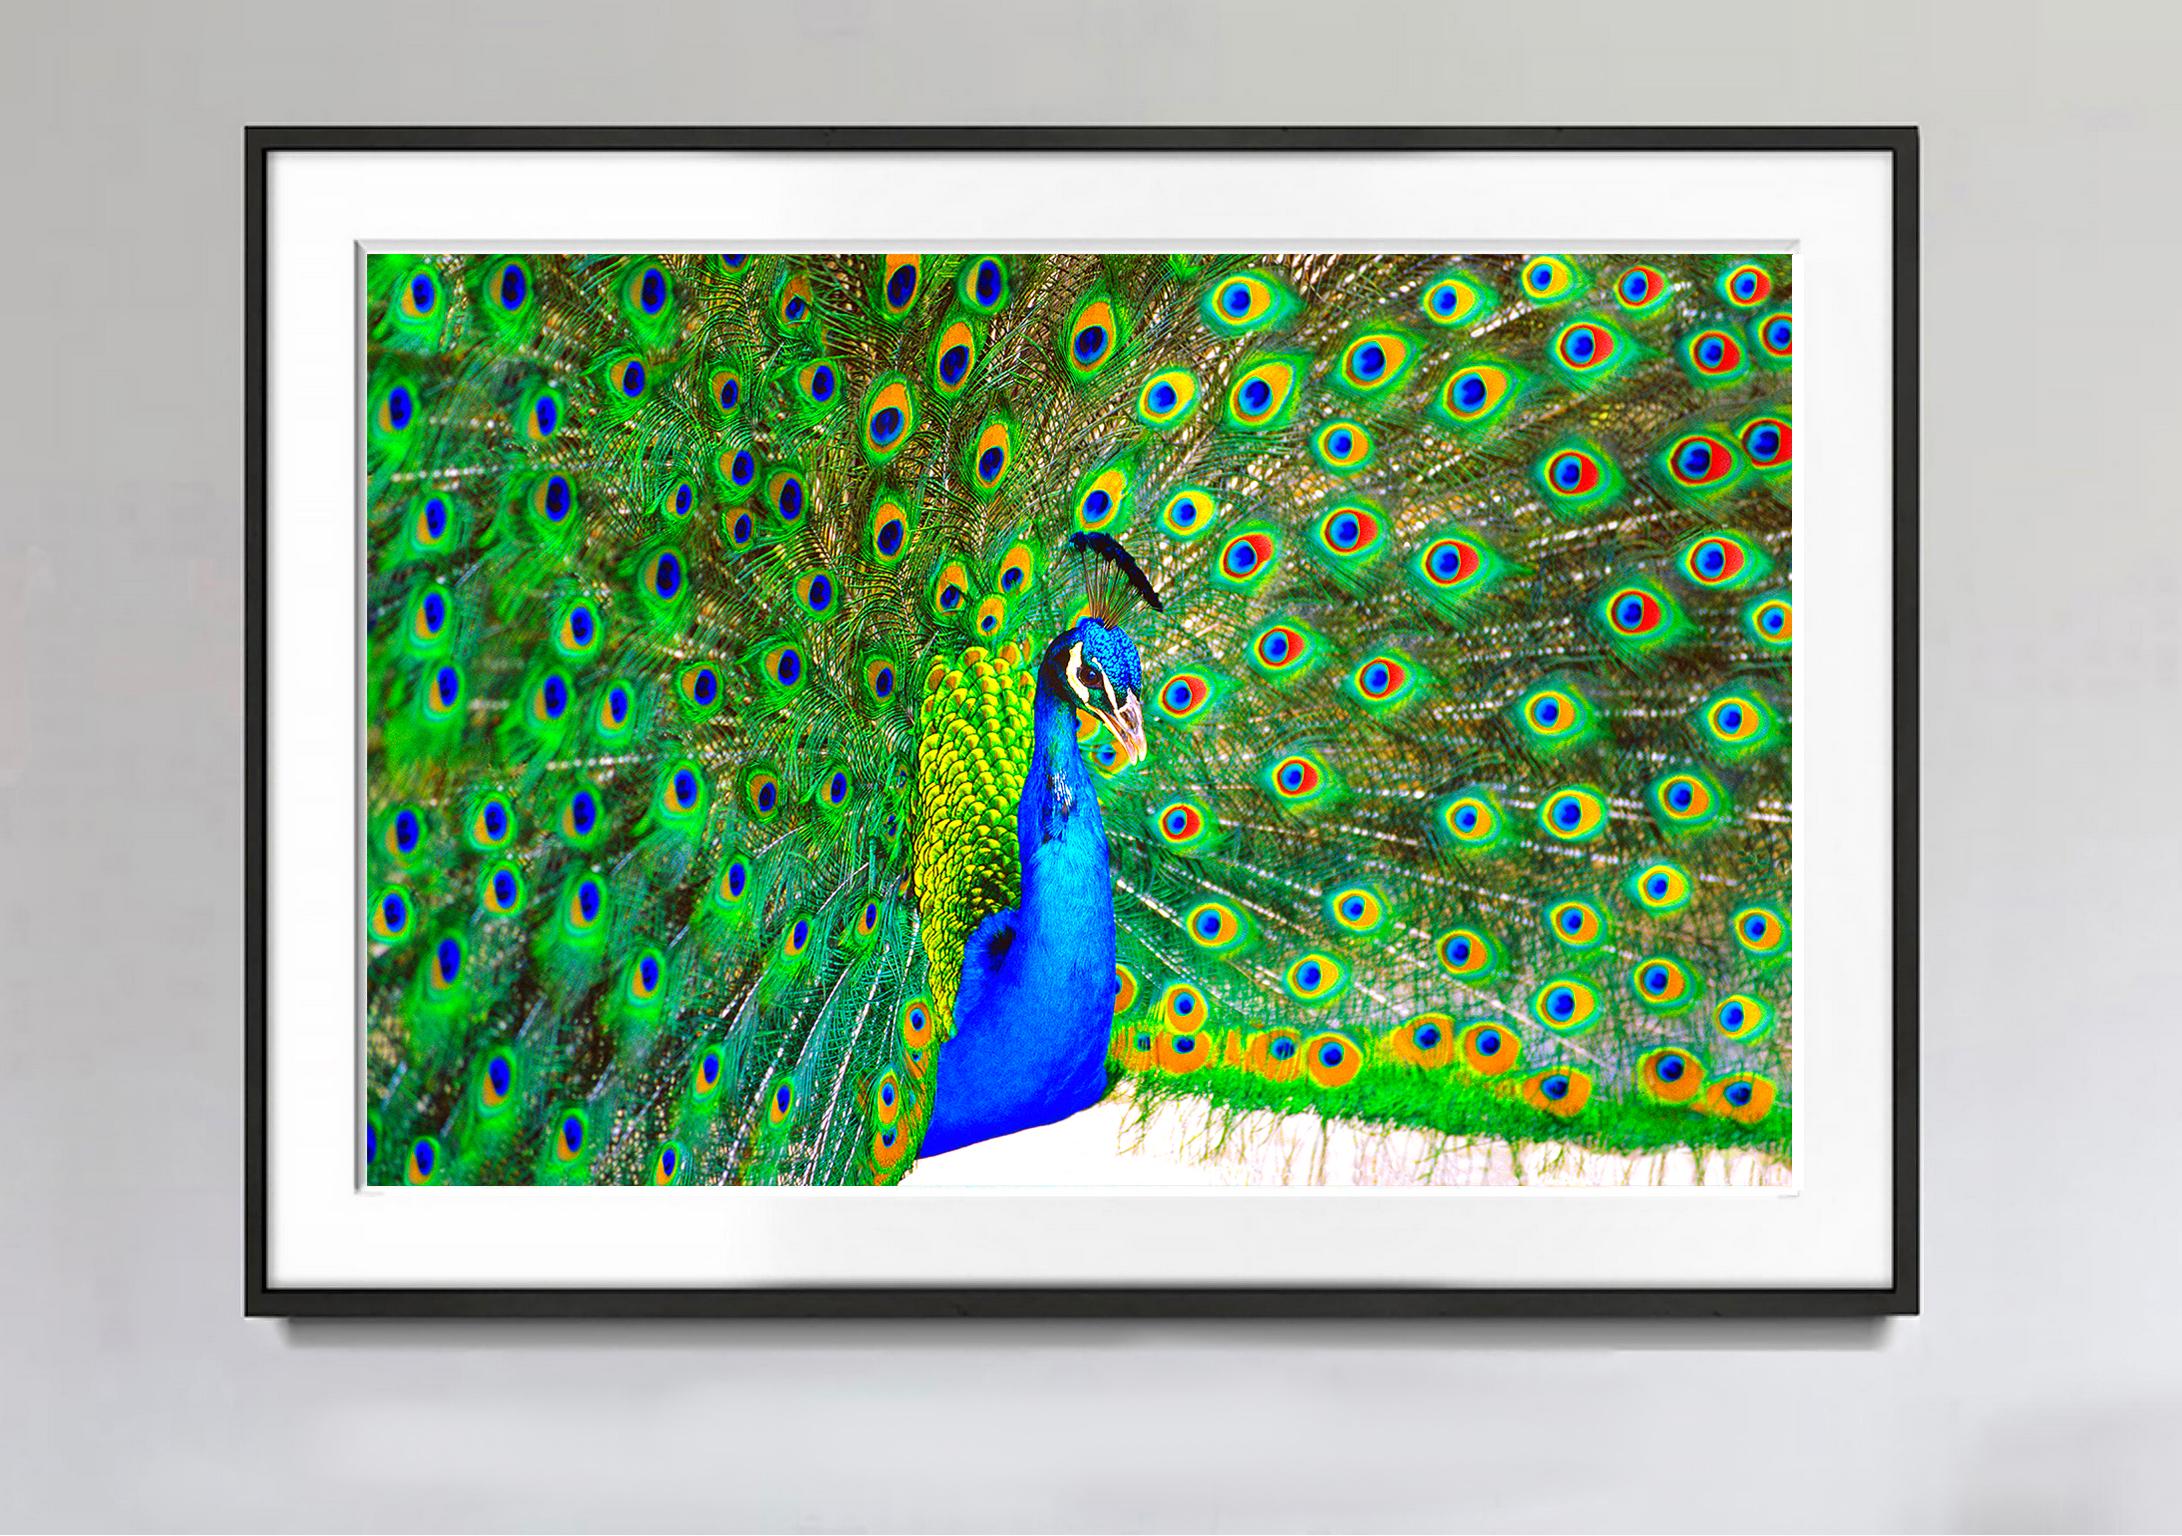 Peacock Displaying Blue and Green Plumage - Photograph by Mitchell Funk